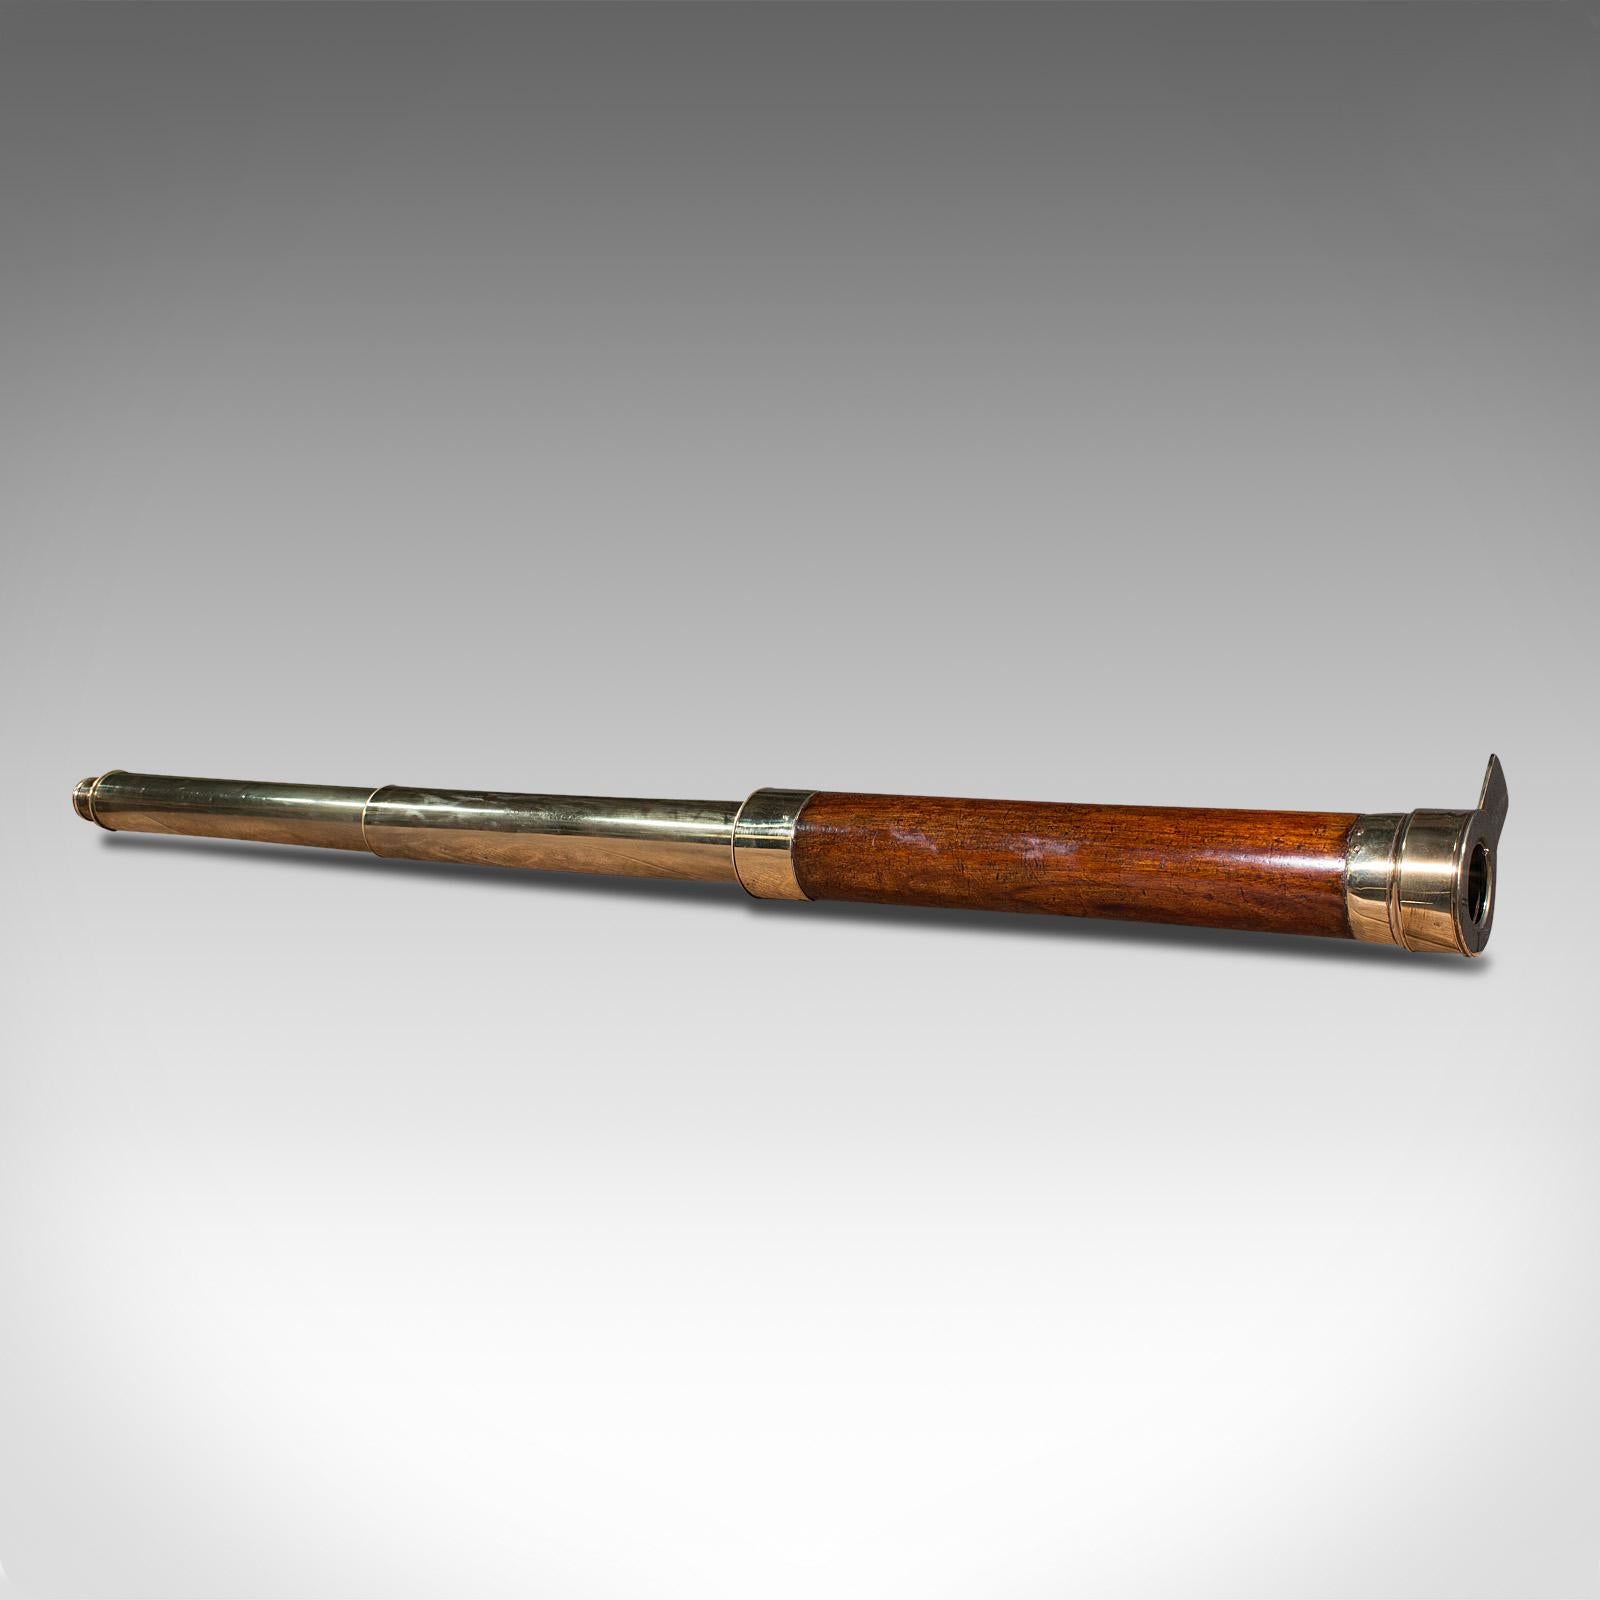 This is an antique two draw telescope. An English, mahogany and brass refractor for terrestrial or astronomical use, dating to the mid Victorian period, circa 1850.

Perfect for bird watching, landscape appreciation, wildlife, or maritime